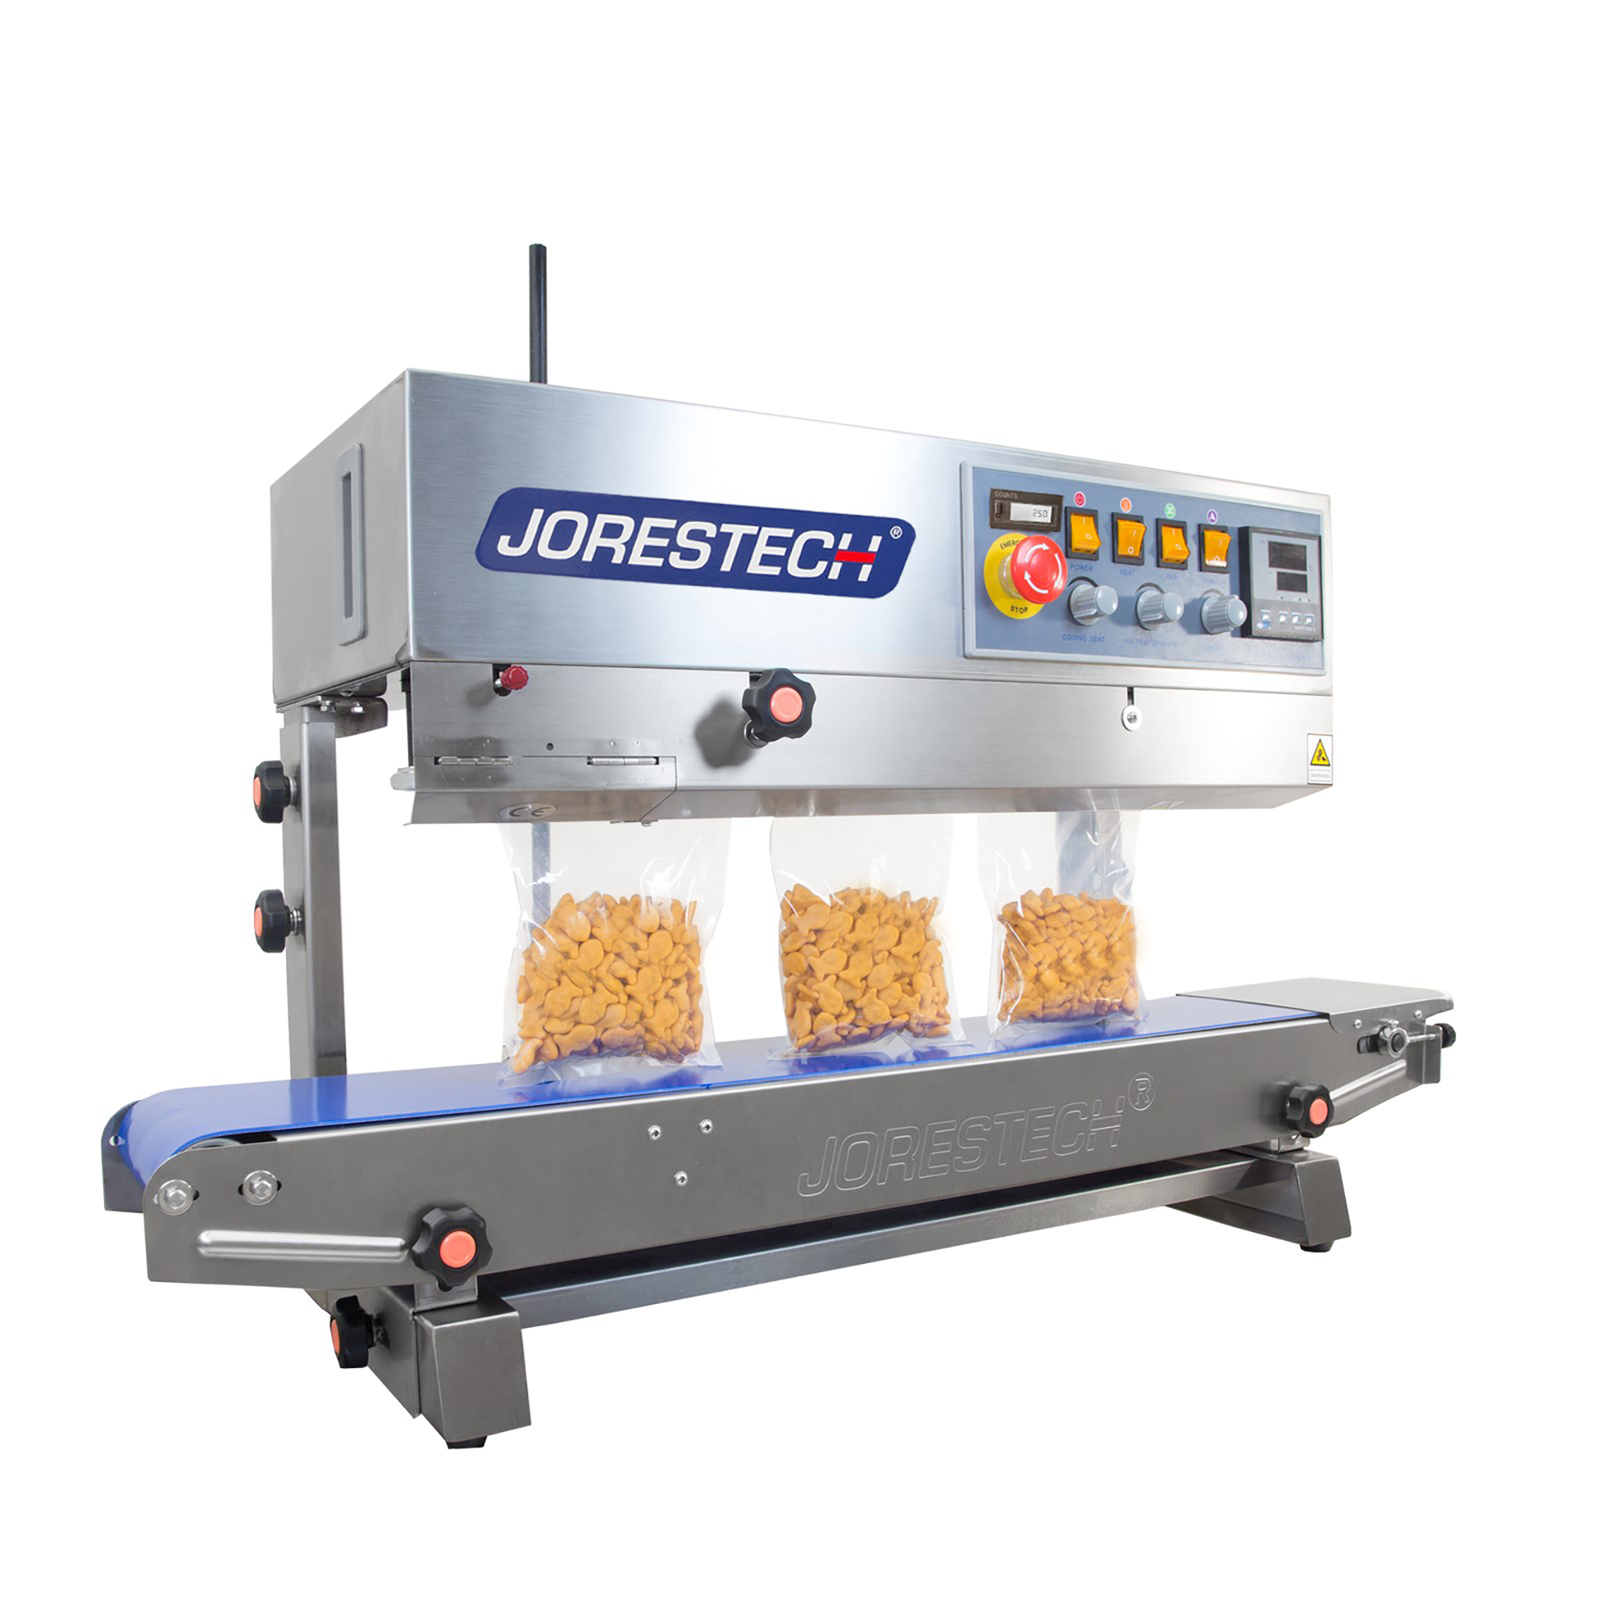 stainless steel JORES TECHNOLOGIES® continuous band sealer sealing several plastic bags filled with orange crackers